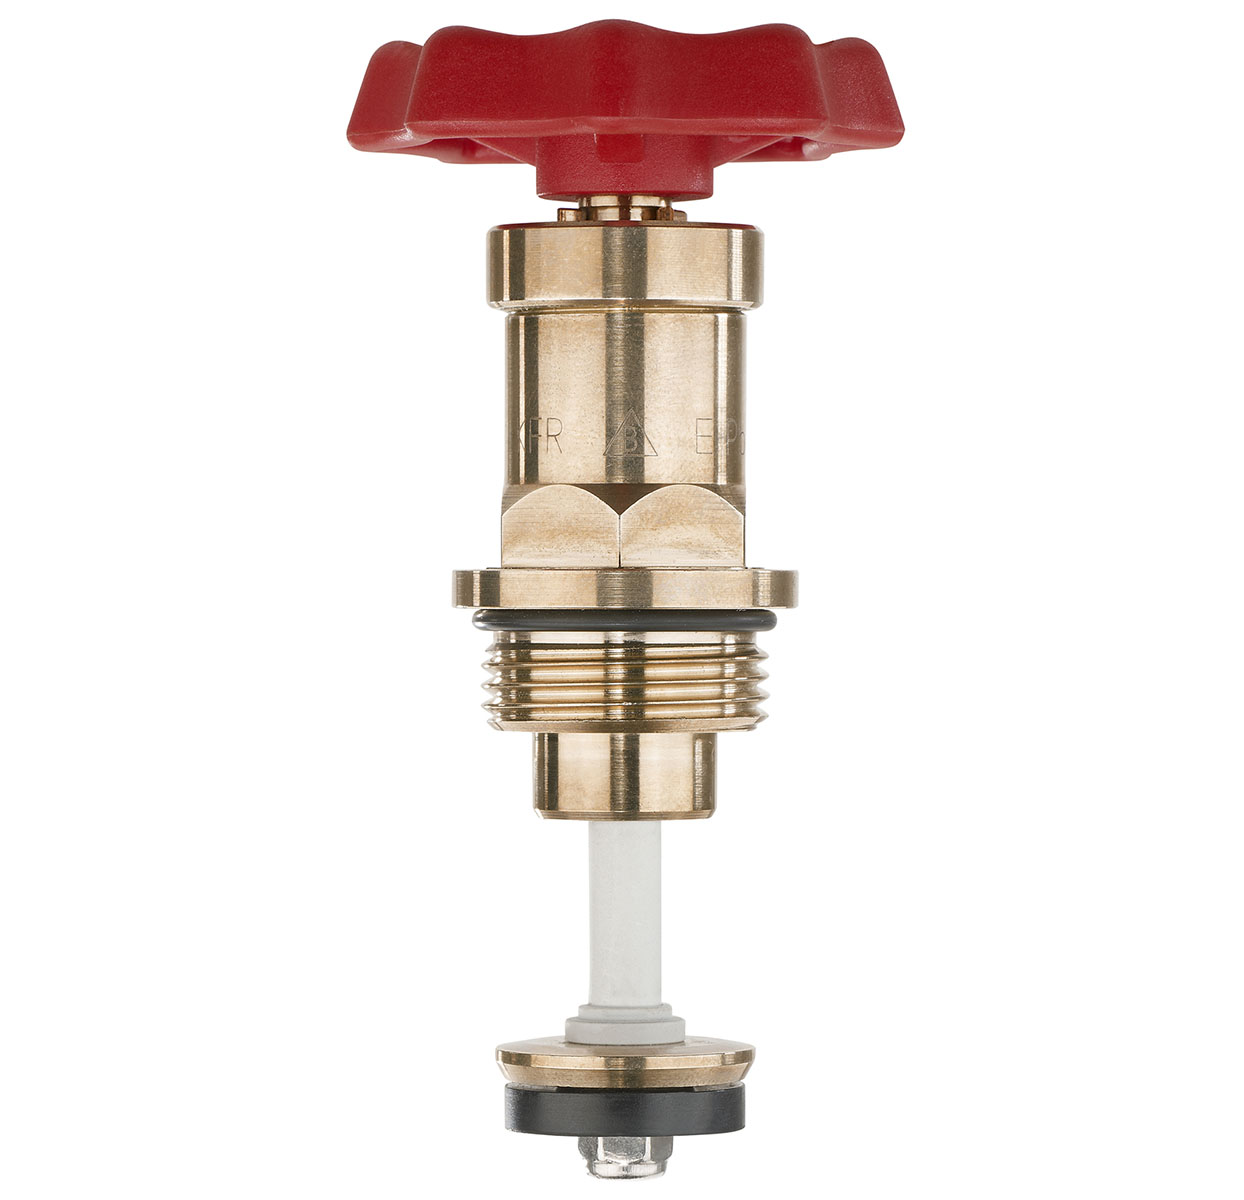 3215500 - Red-brass upper-part with grease chamber for Combined Free-flow and Backflow-preventer valves